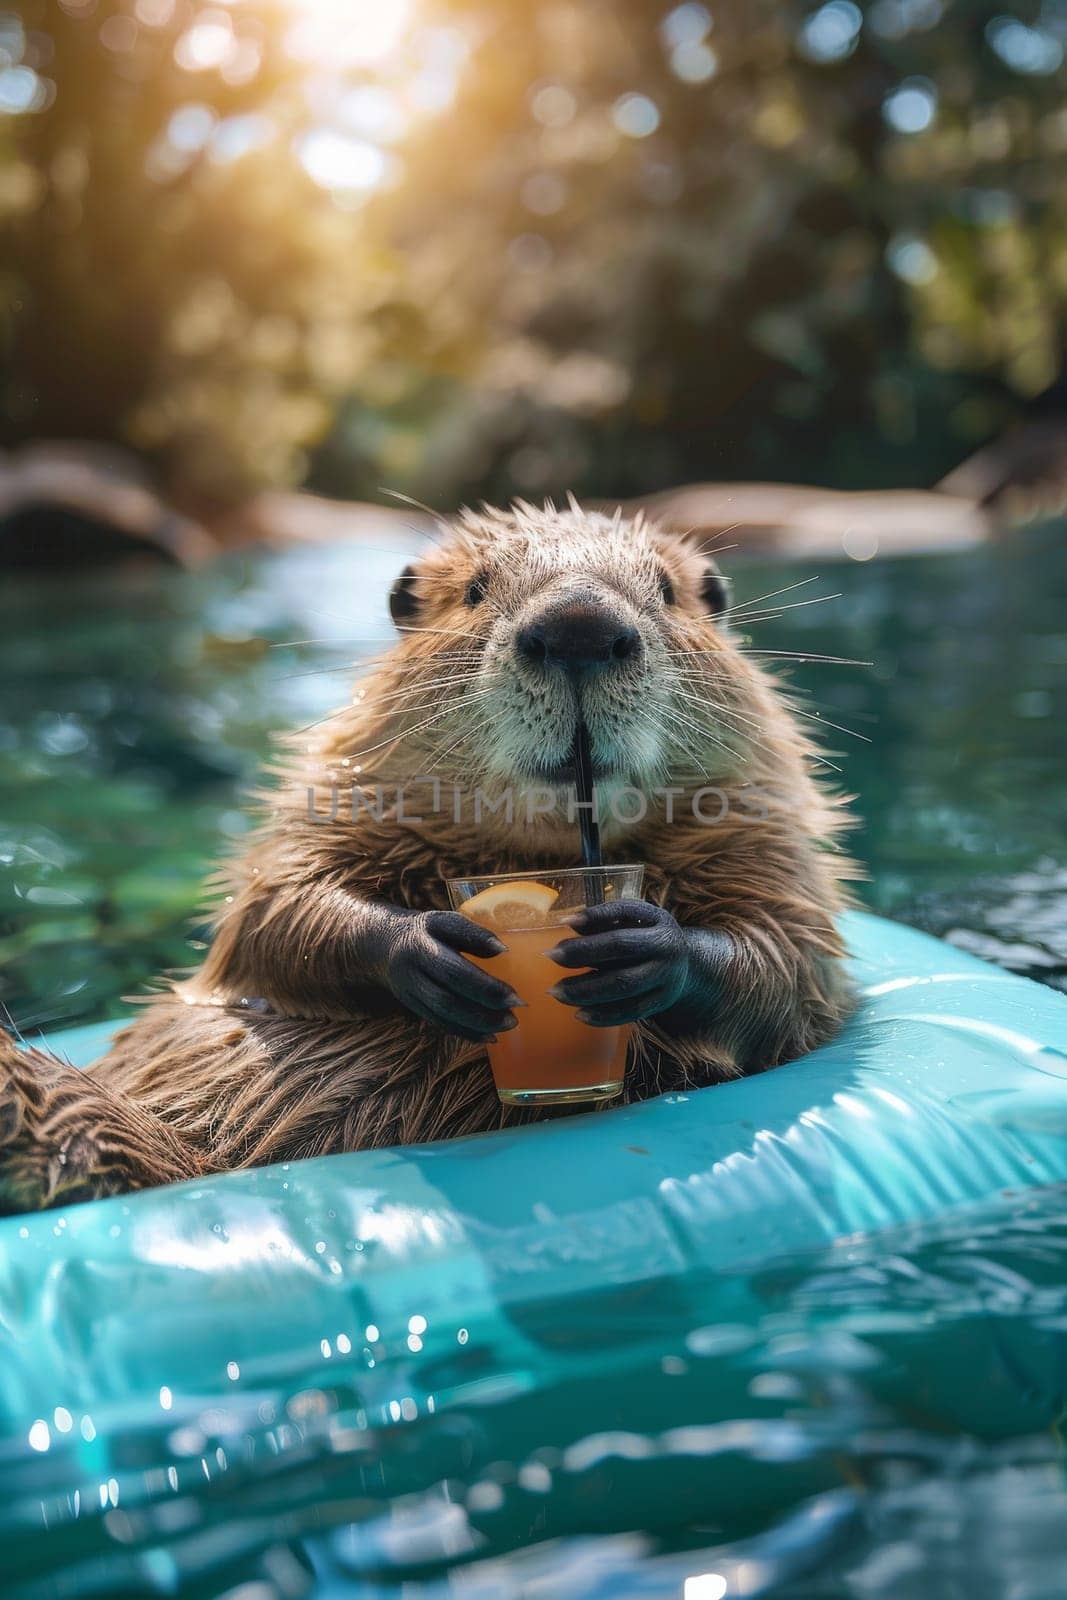 beaver animal is in a pool with a cup in its mouth. The animal is holding the cup and he is enjoying itself